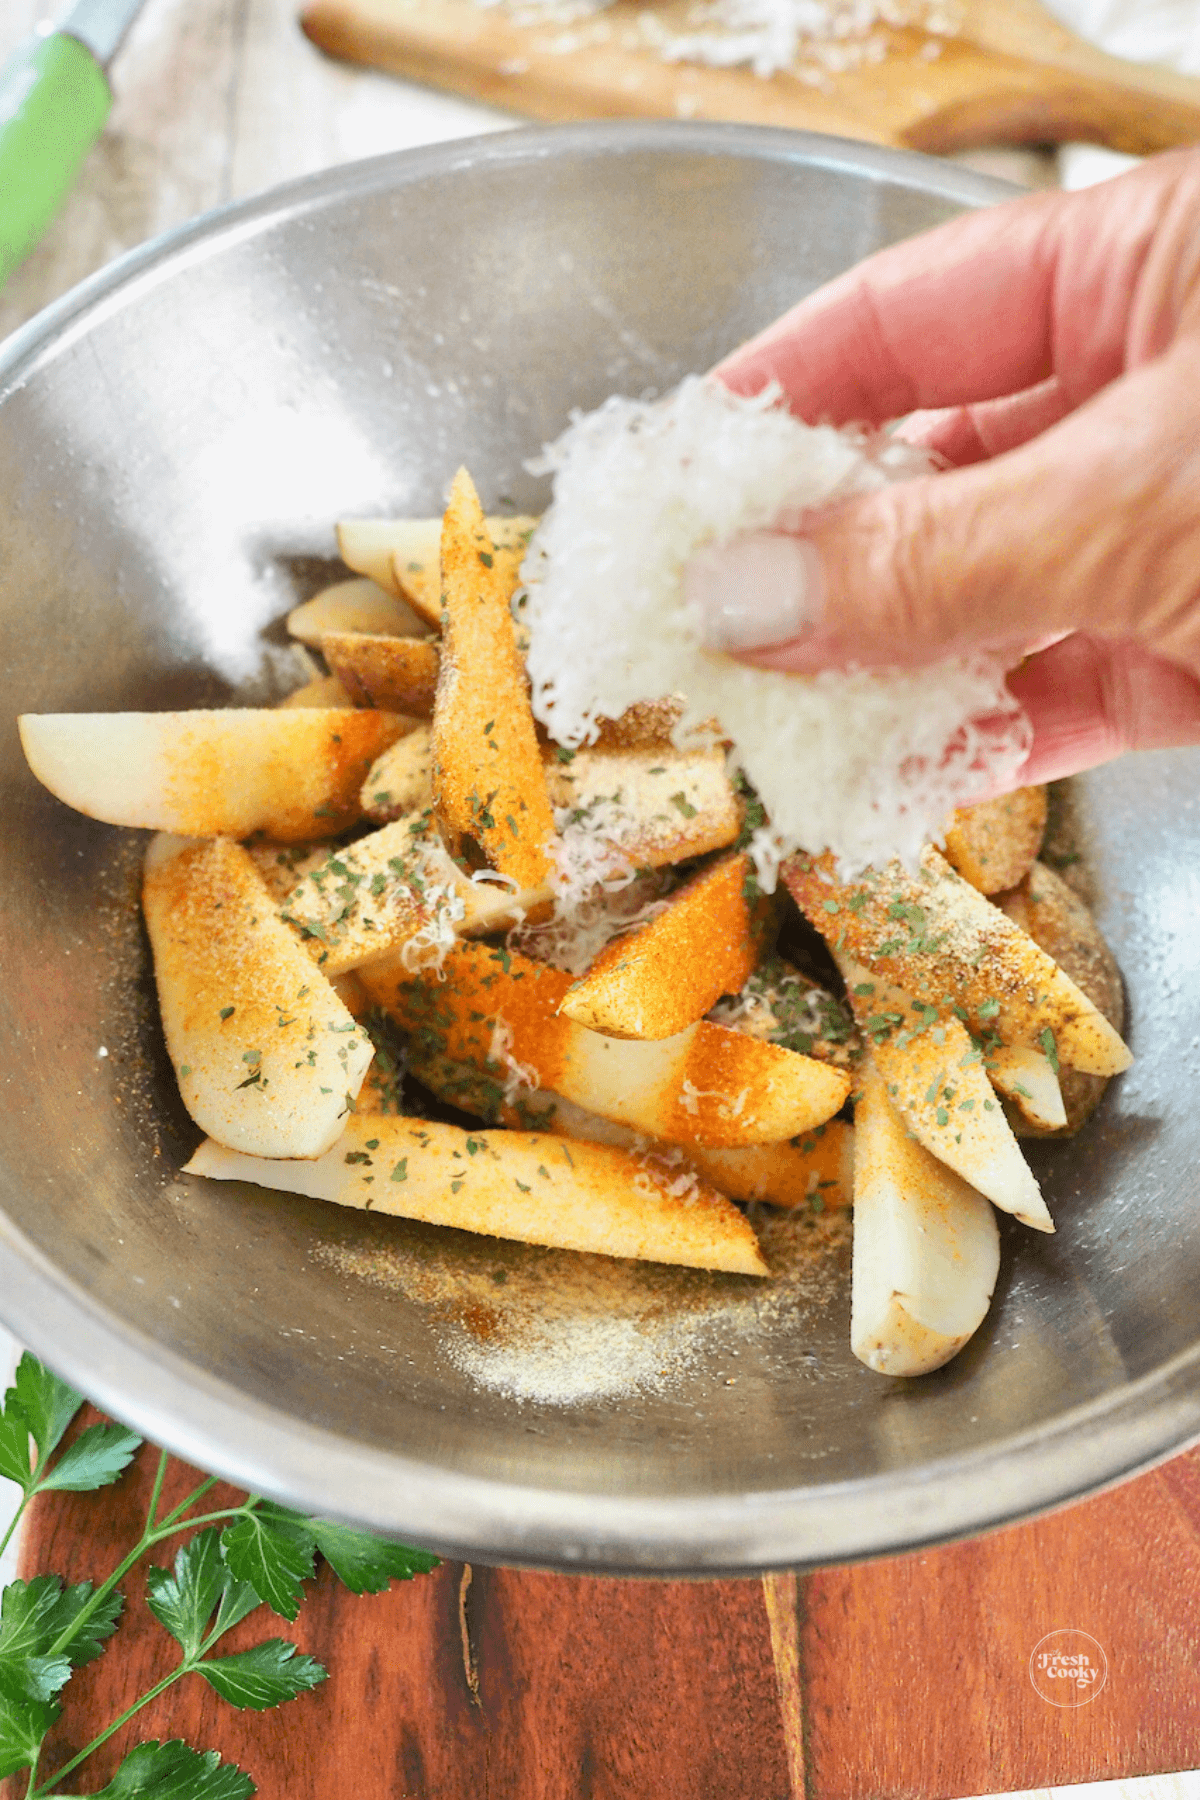 Hand adding grated parmesan cheese to seasoned fries. 